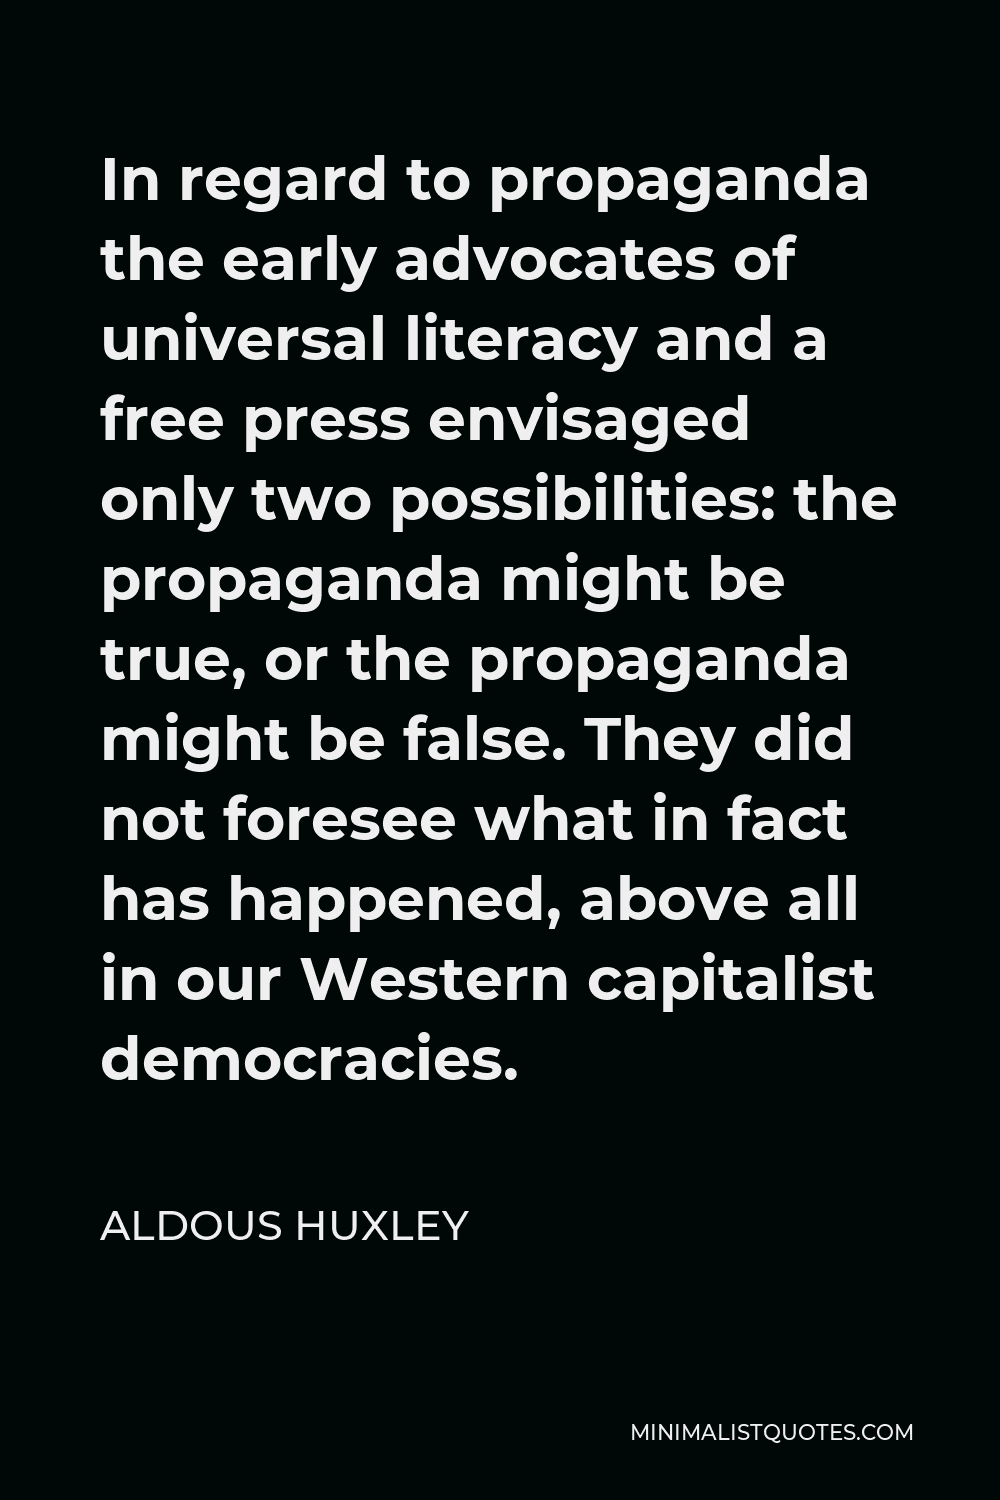 Aldous Huxley Quote - In regard to propaganda the early advocates of universal literacy and a free press envisaged only two possibilities: the propaganda might be true, or the propaganda might be false. They did not foresee what in fact has happened, above all in our Western capitalist democracies.